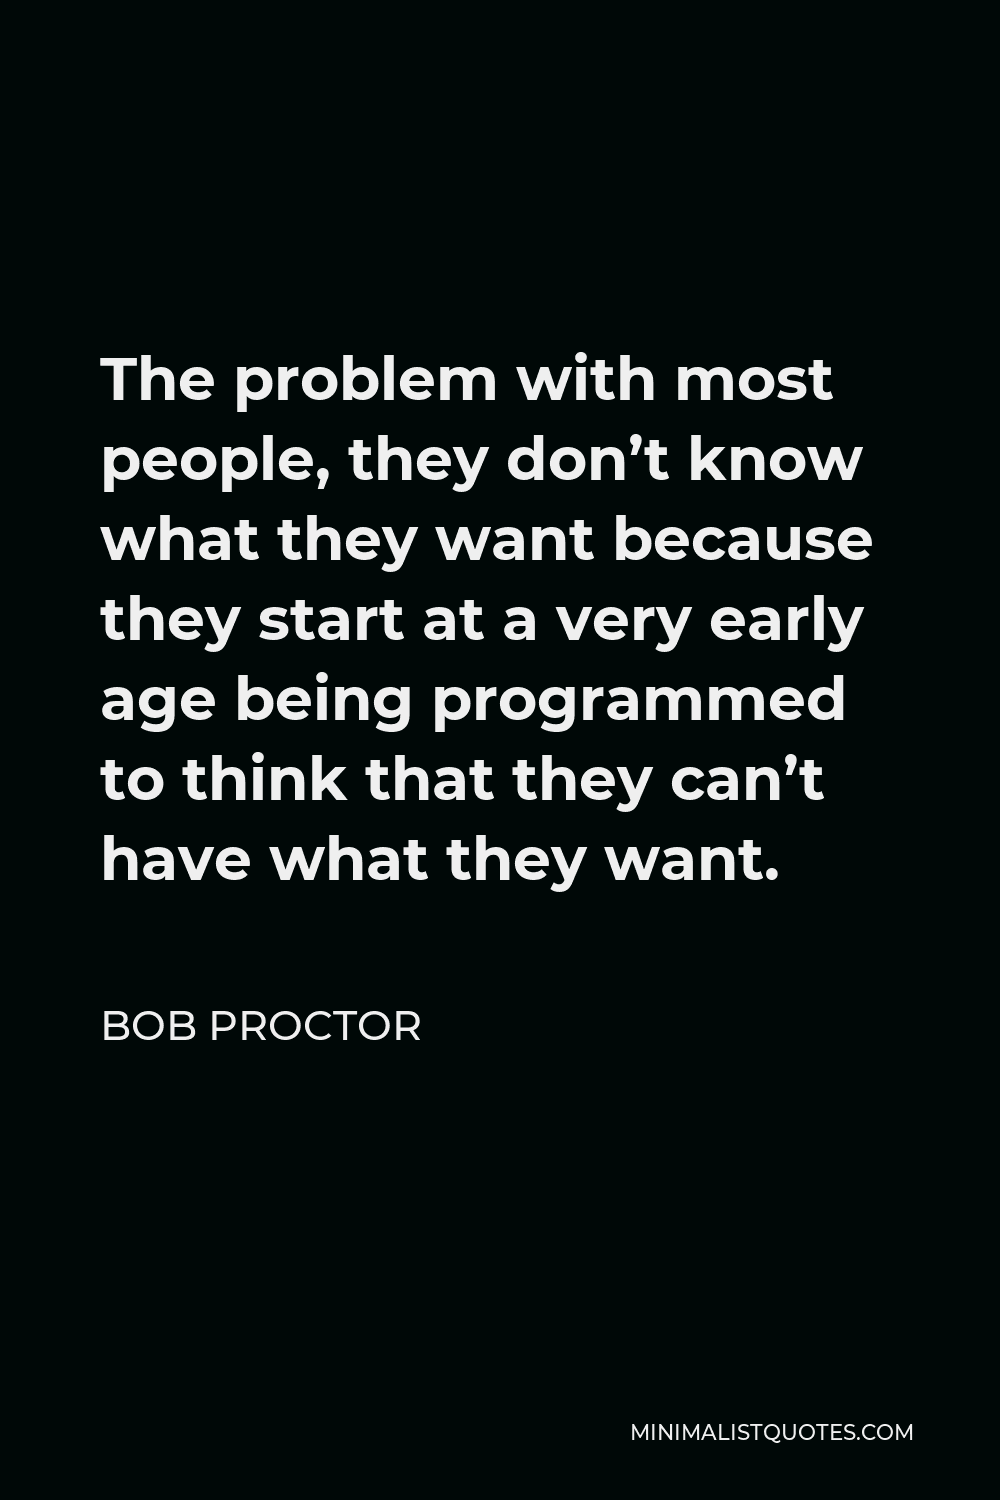 Bob Proctor Quote - The problem with most people, they don’t know what they want because they start at a very early age being programmed to think that they can’t have what they want.